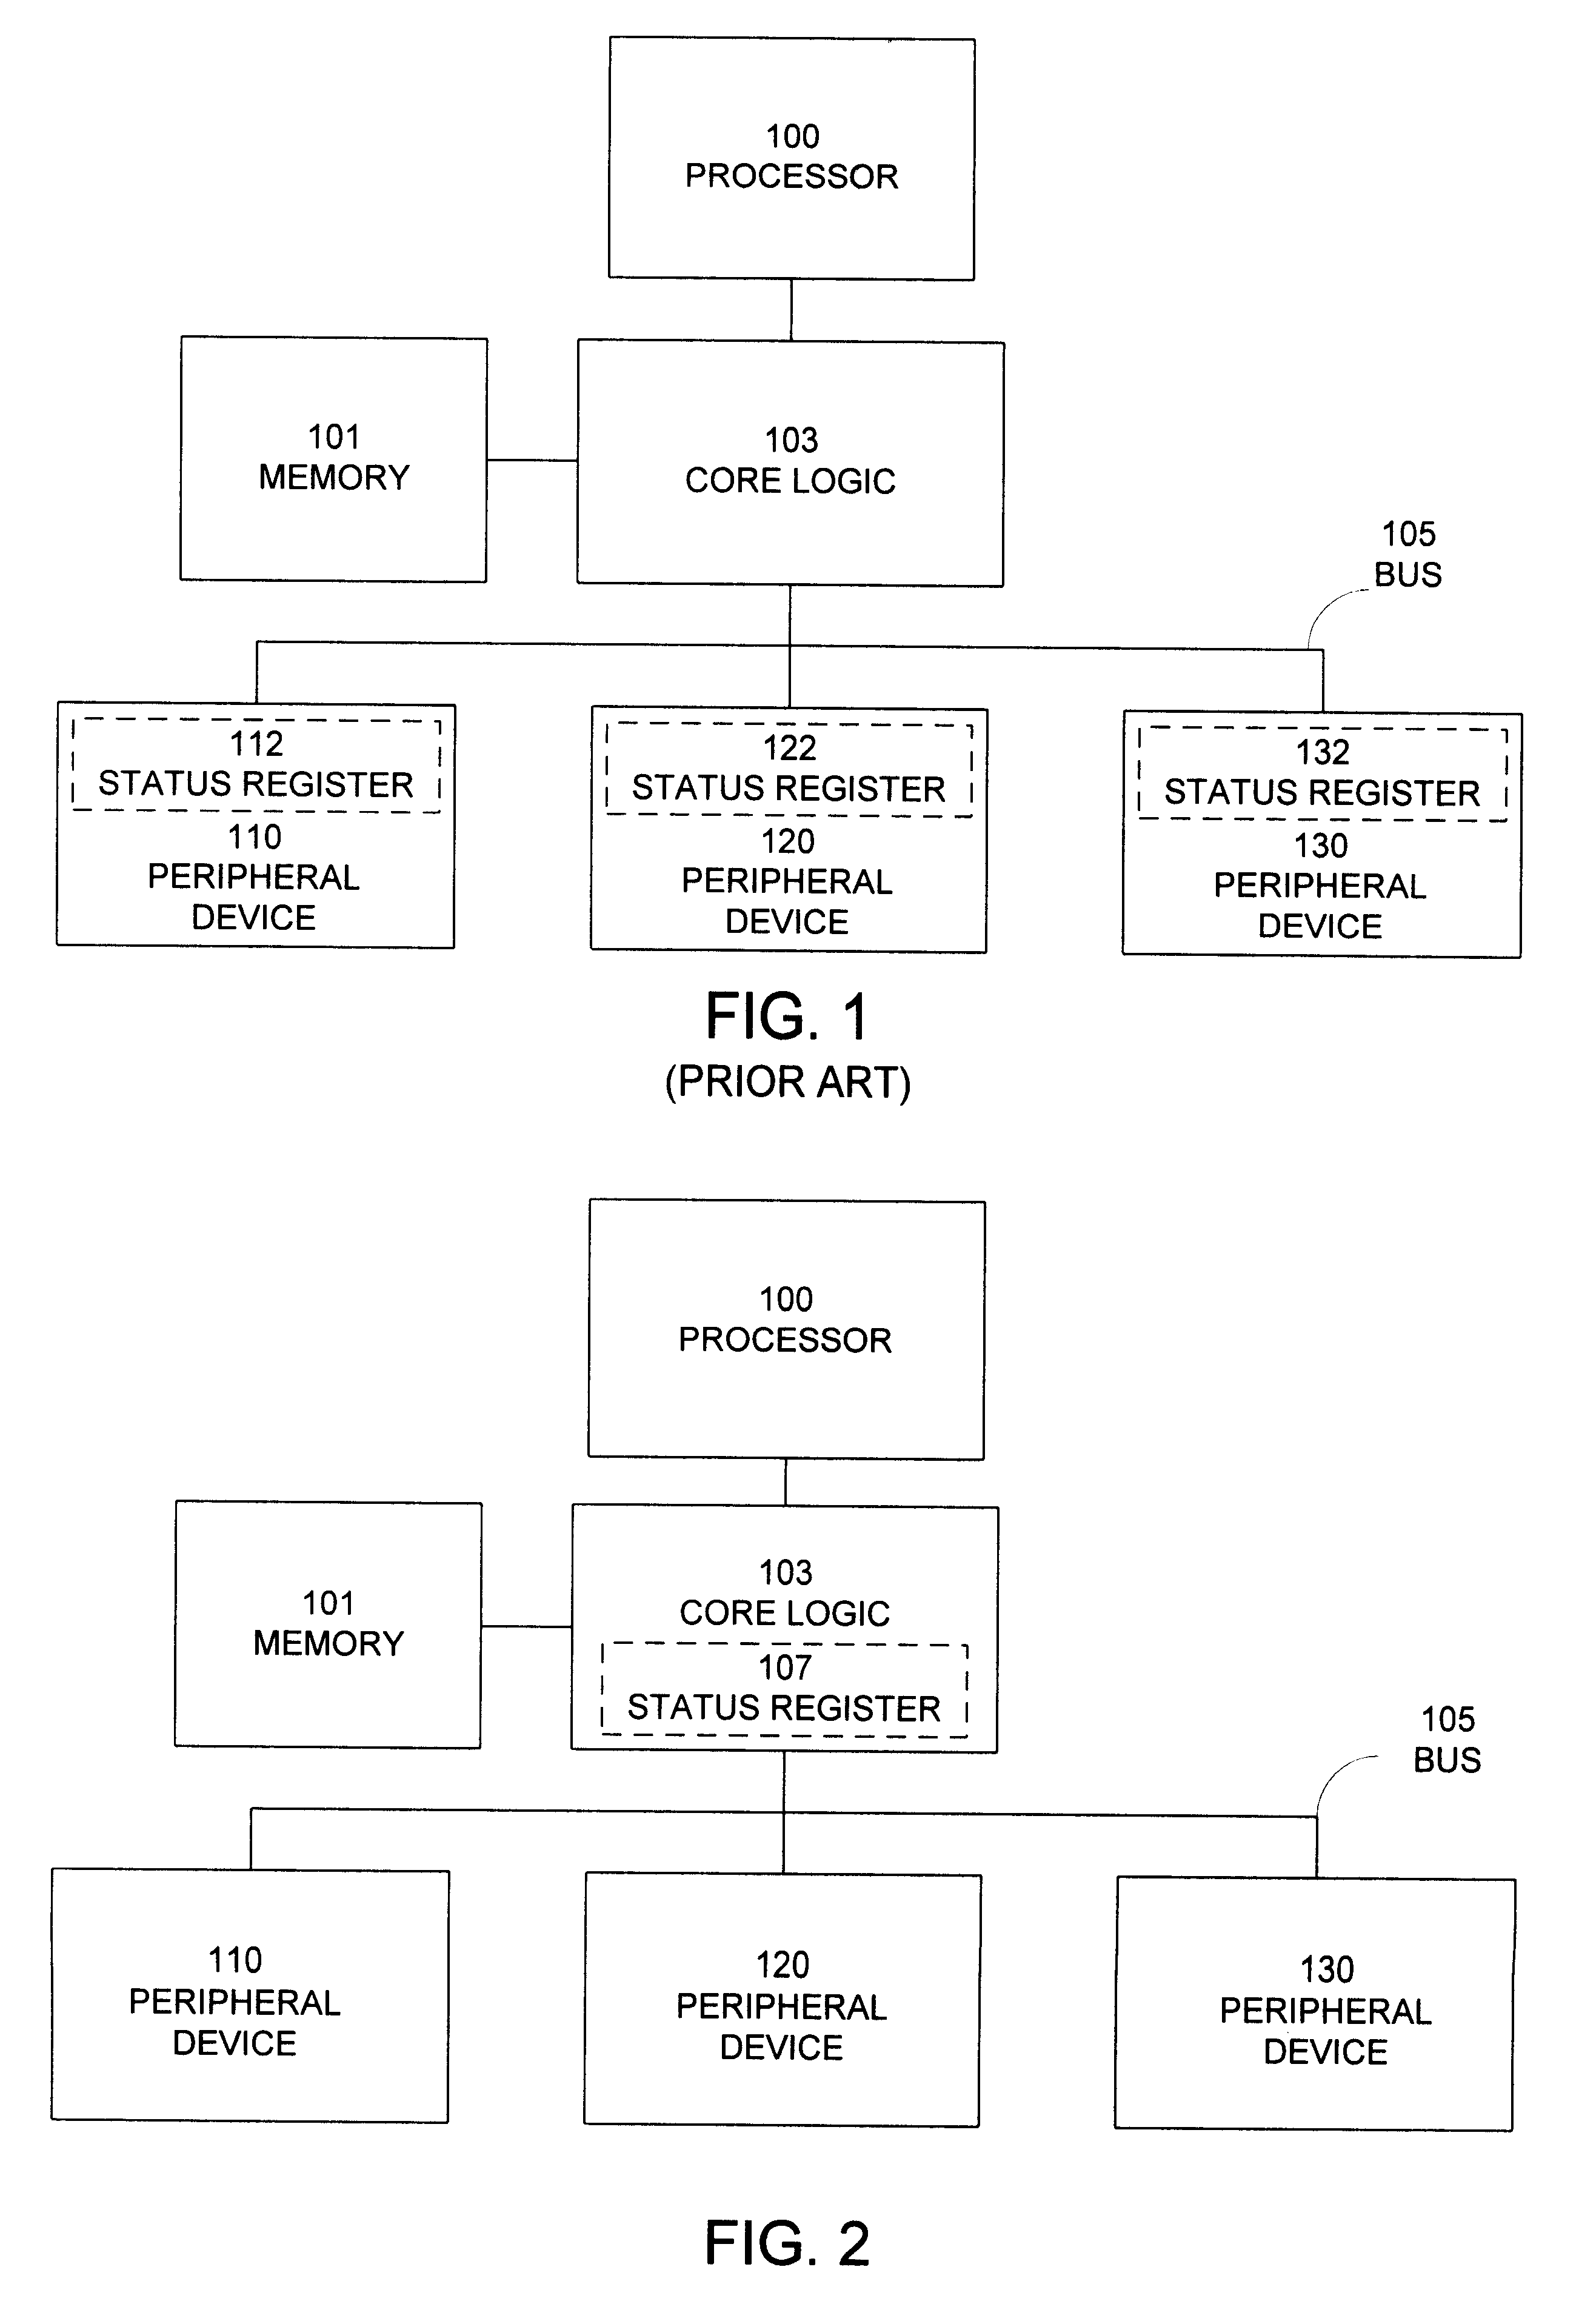 Computer system including core logic unit with internal register for peripheral status